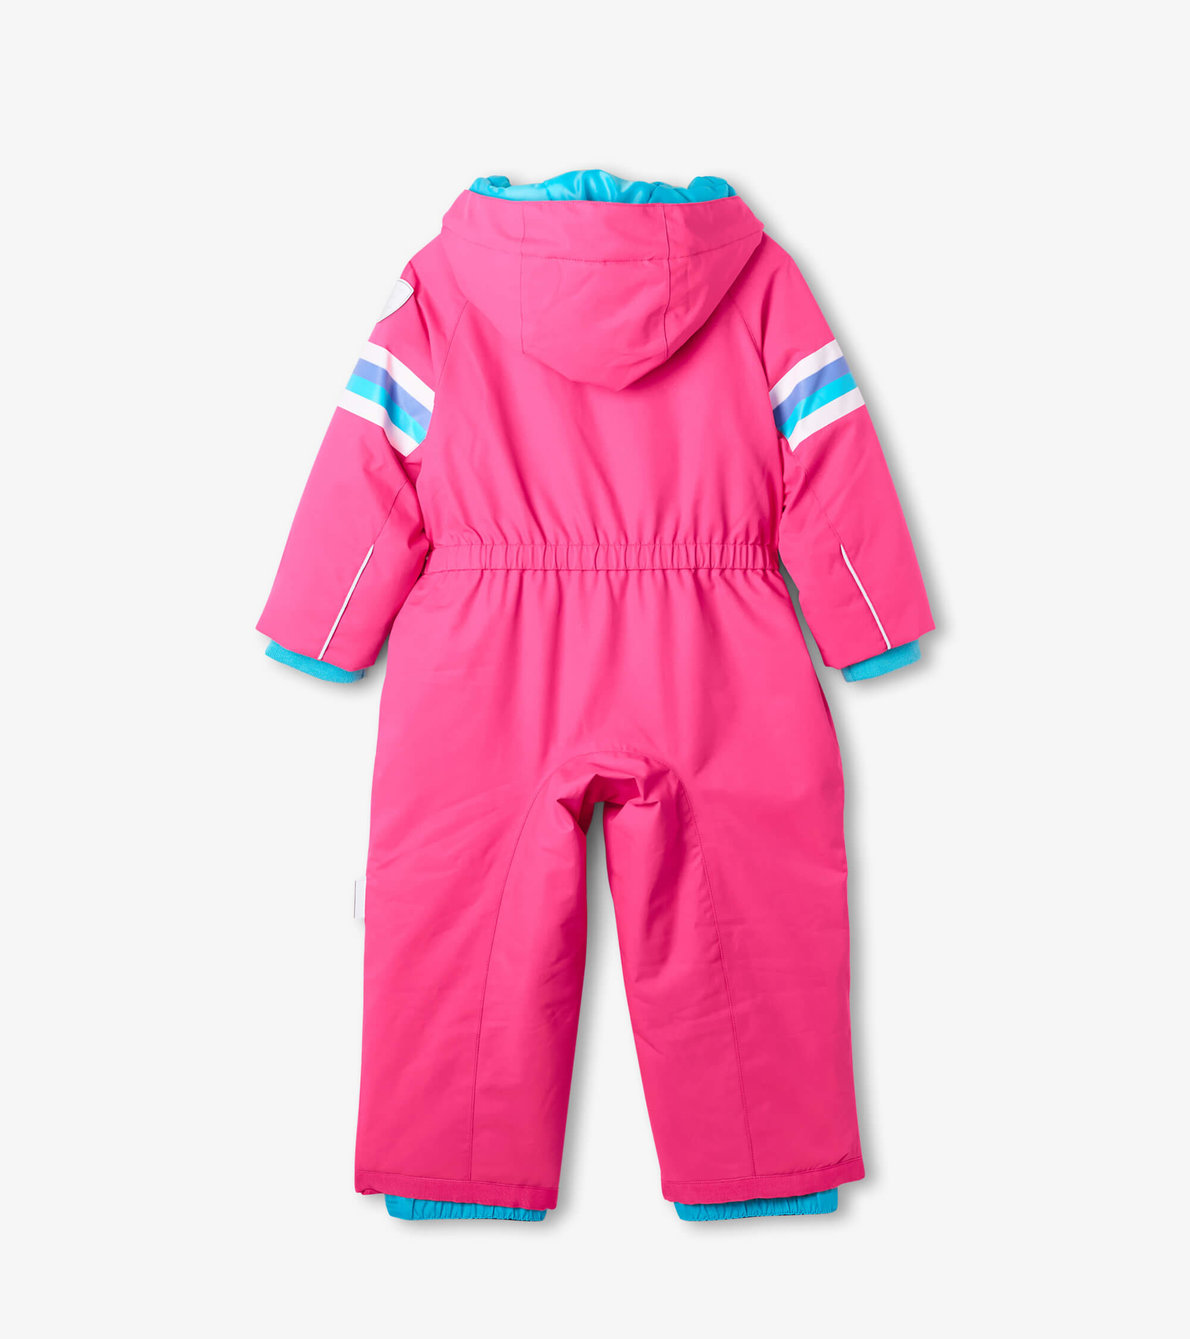 View larger image of Pink Toddler Snowday Suit